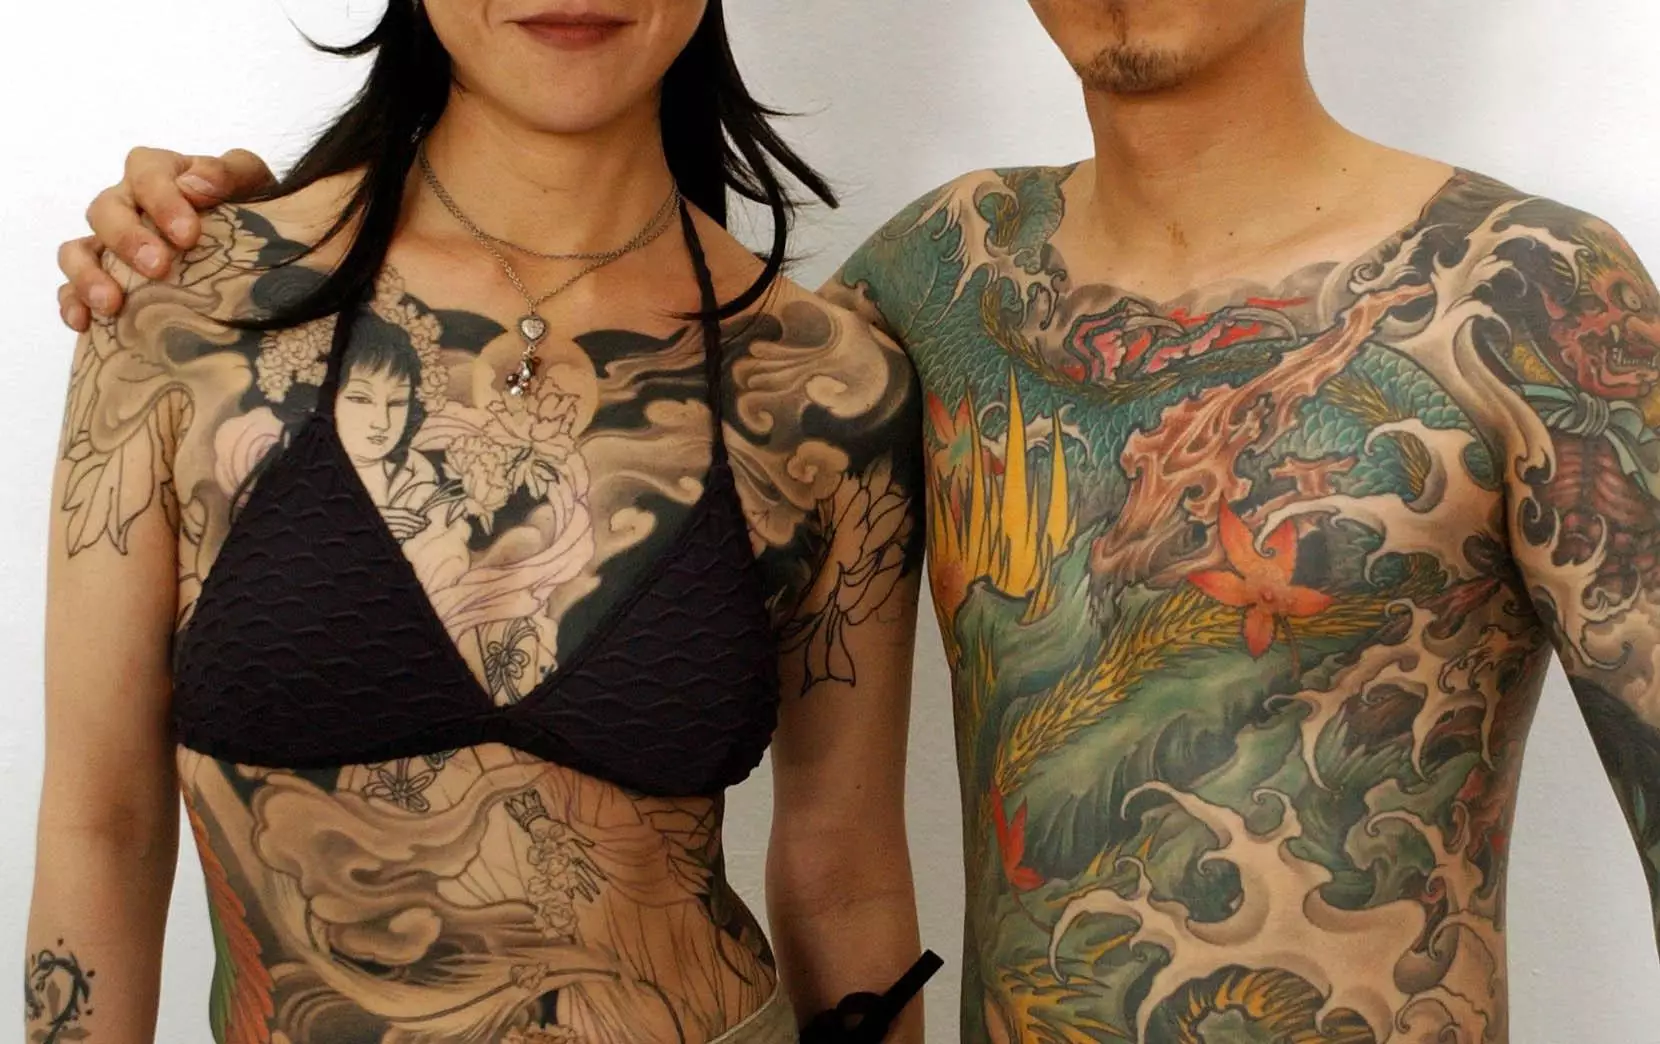 Tattoos Will Help You Get A Job, According To New Study